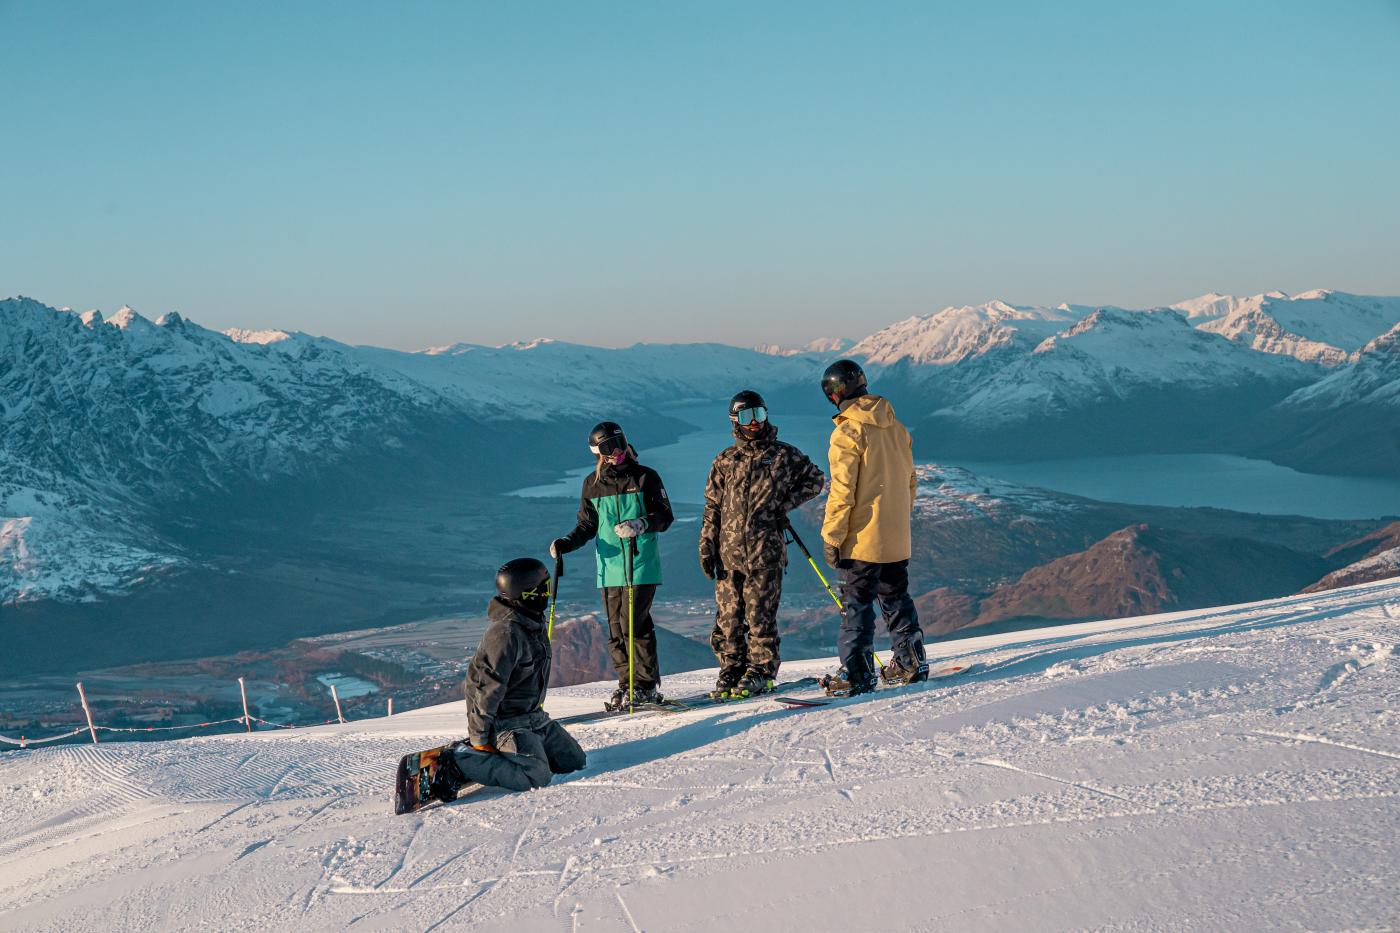 Snowboarders and skiers at Coronet Peak